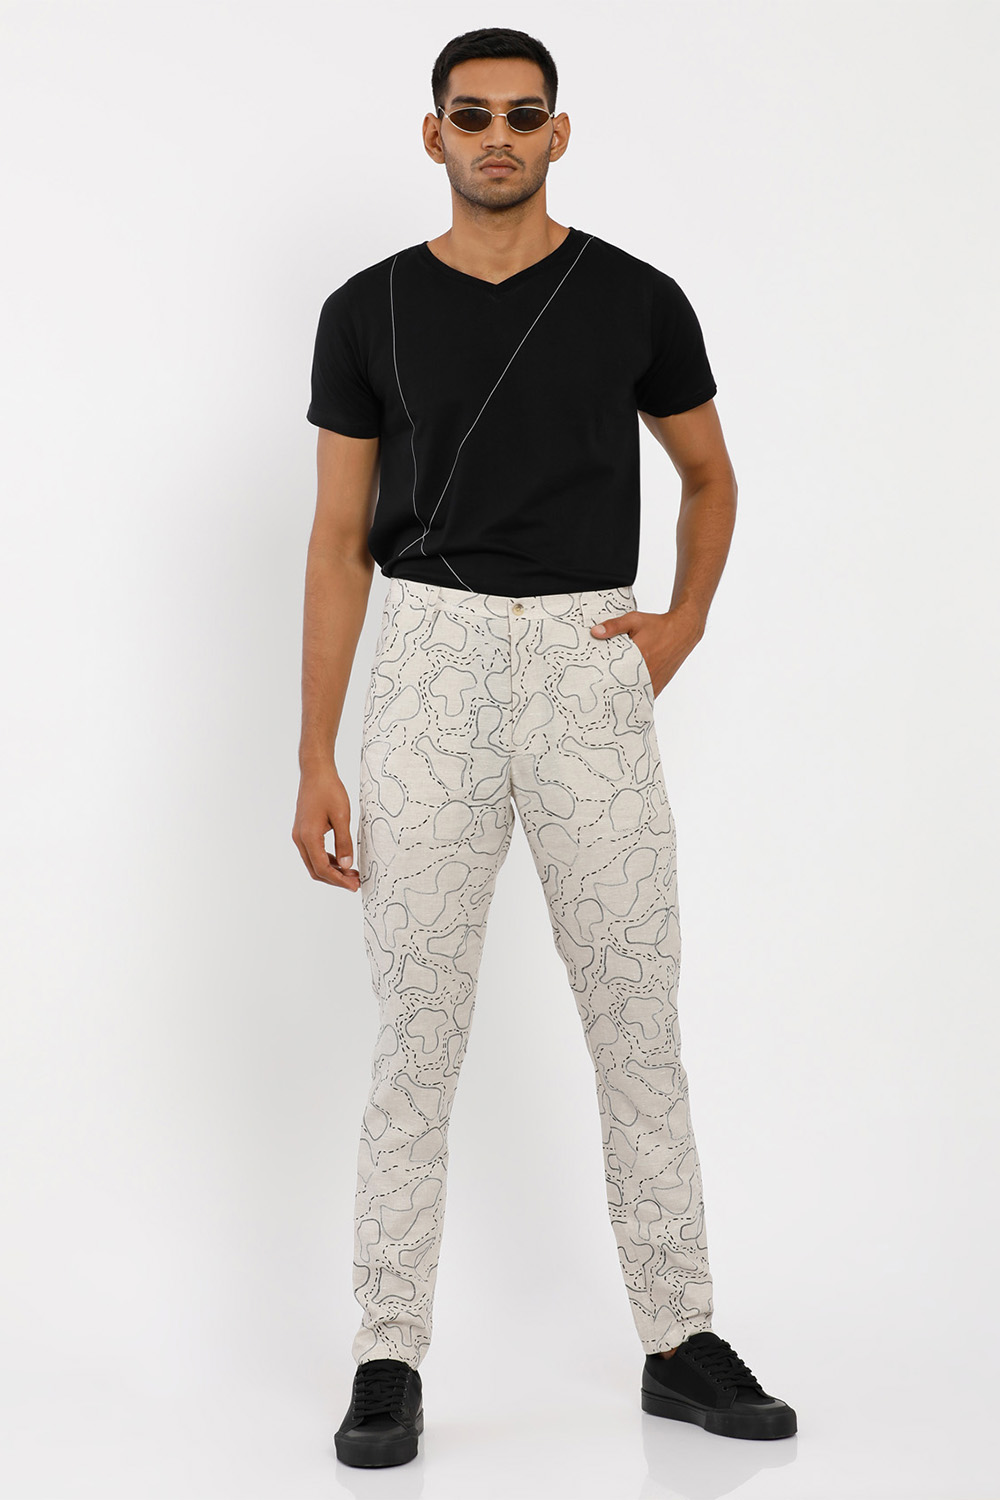 Voyage Toco Trouser